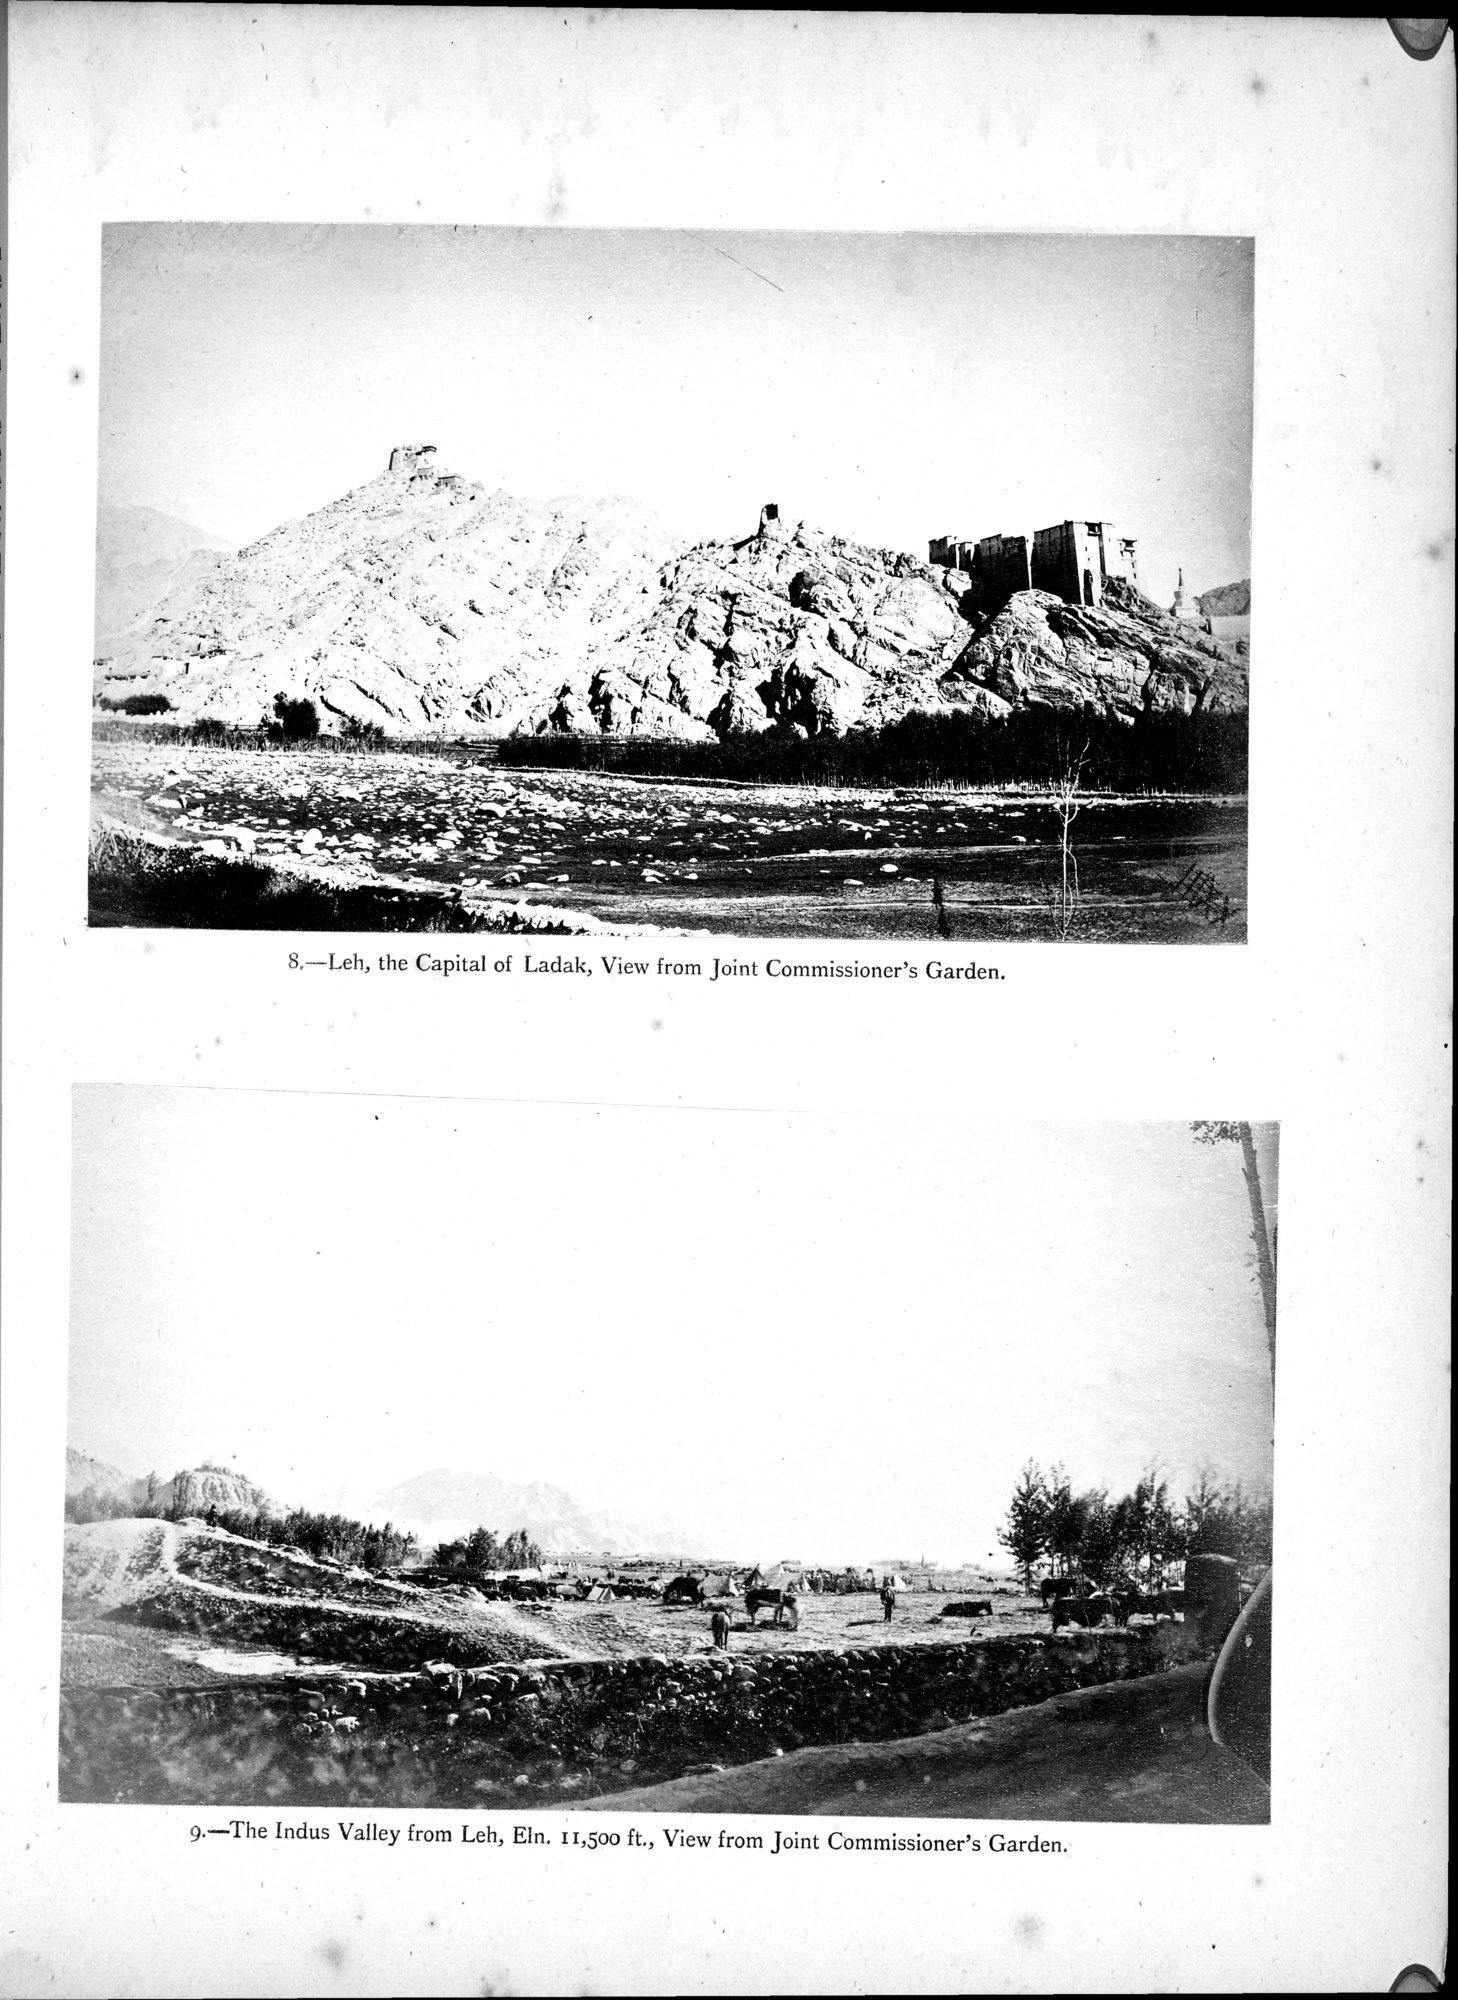 Report of a Mission to Yarkund in 1873 : vol.1 / 57 ページ（白黒高解像度画像）